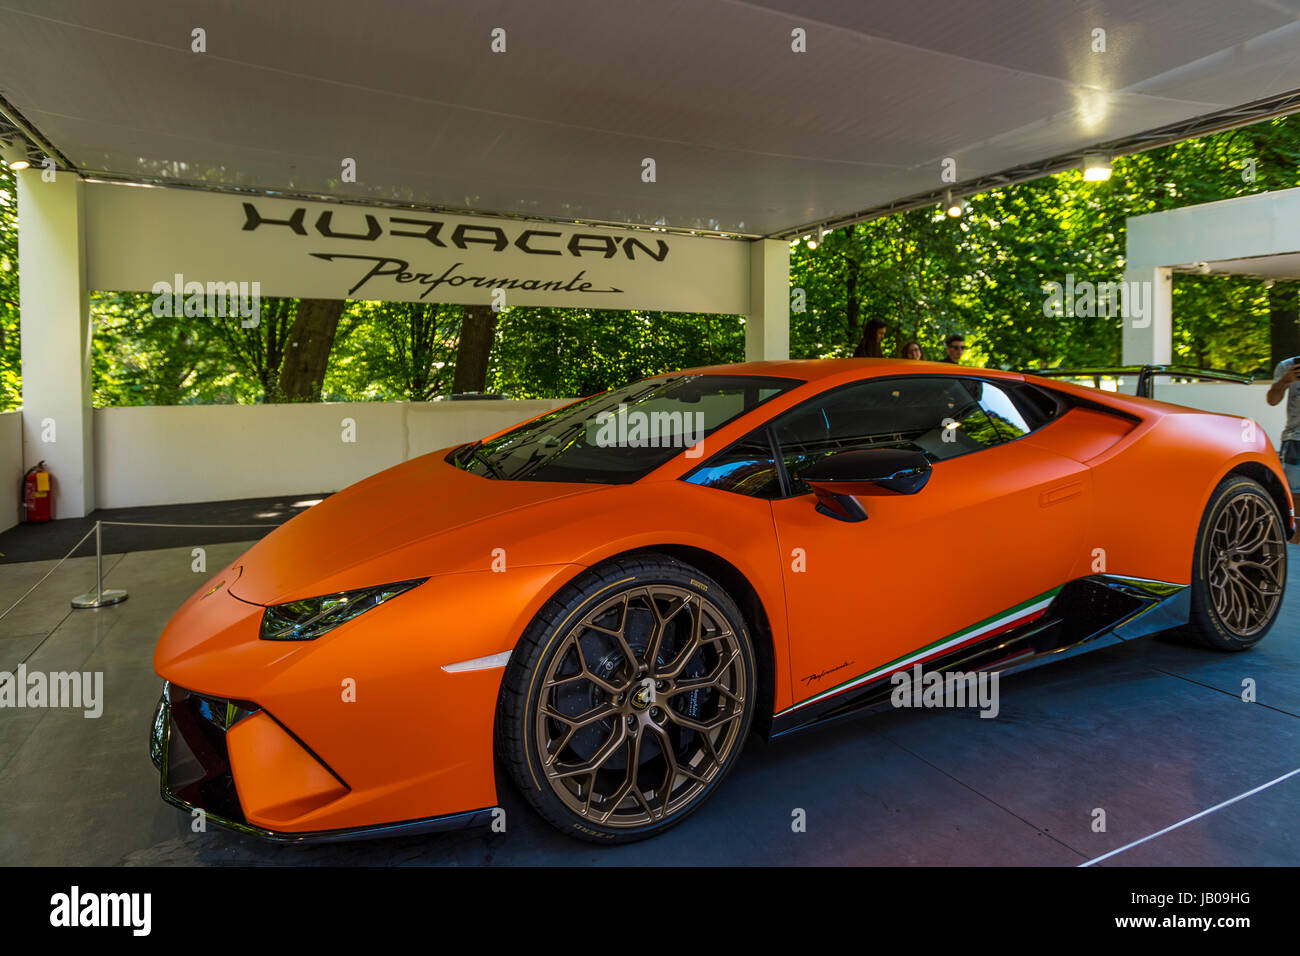 Le piémont, Turin, Italie. Le 08 juin, 2017. Italie Piémont Turin Valentino 'Sseul dell'auto di Torino - ''Ouragan Lamborghini Performante Crédit : Realy Easy Star/Alamy Live News Banque D'Images